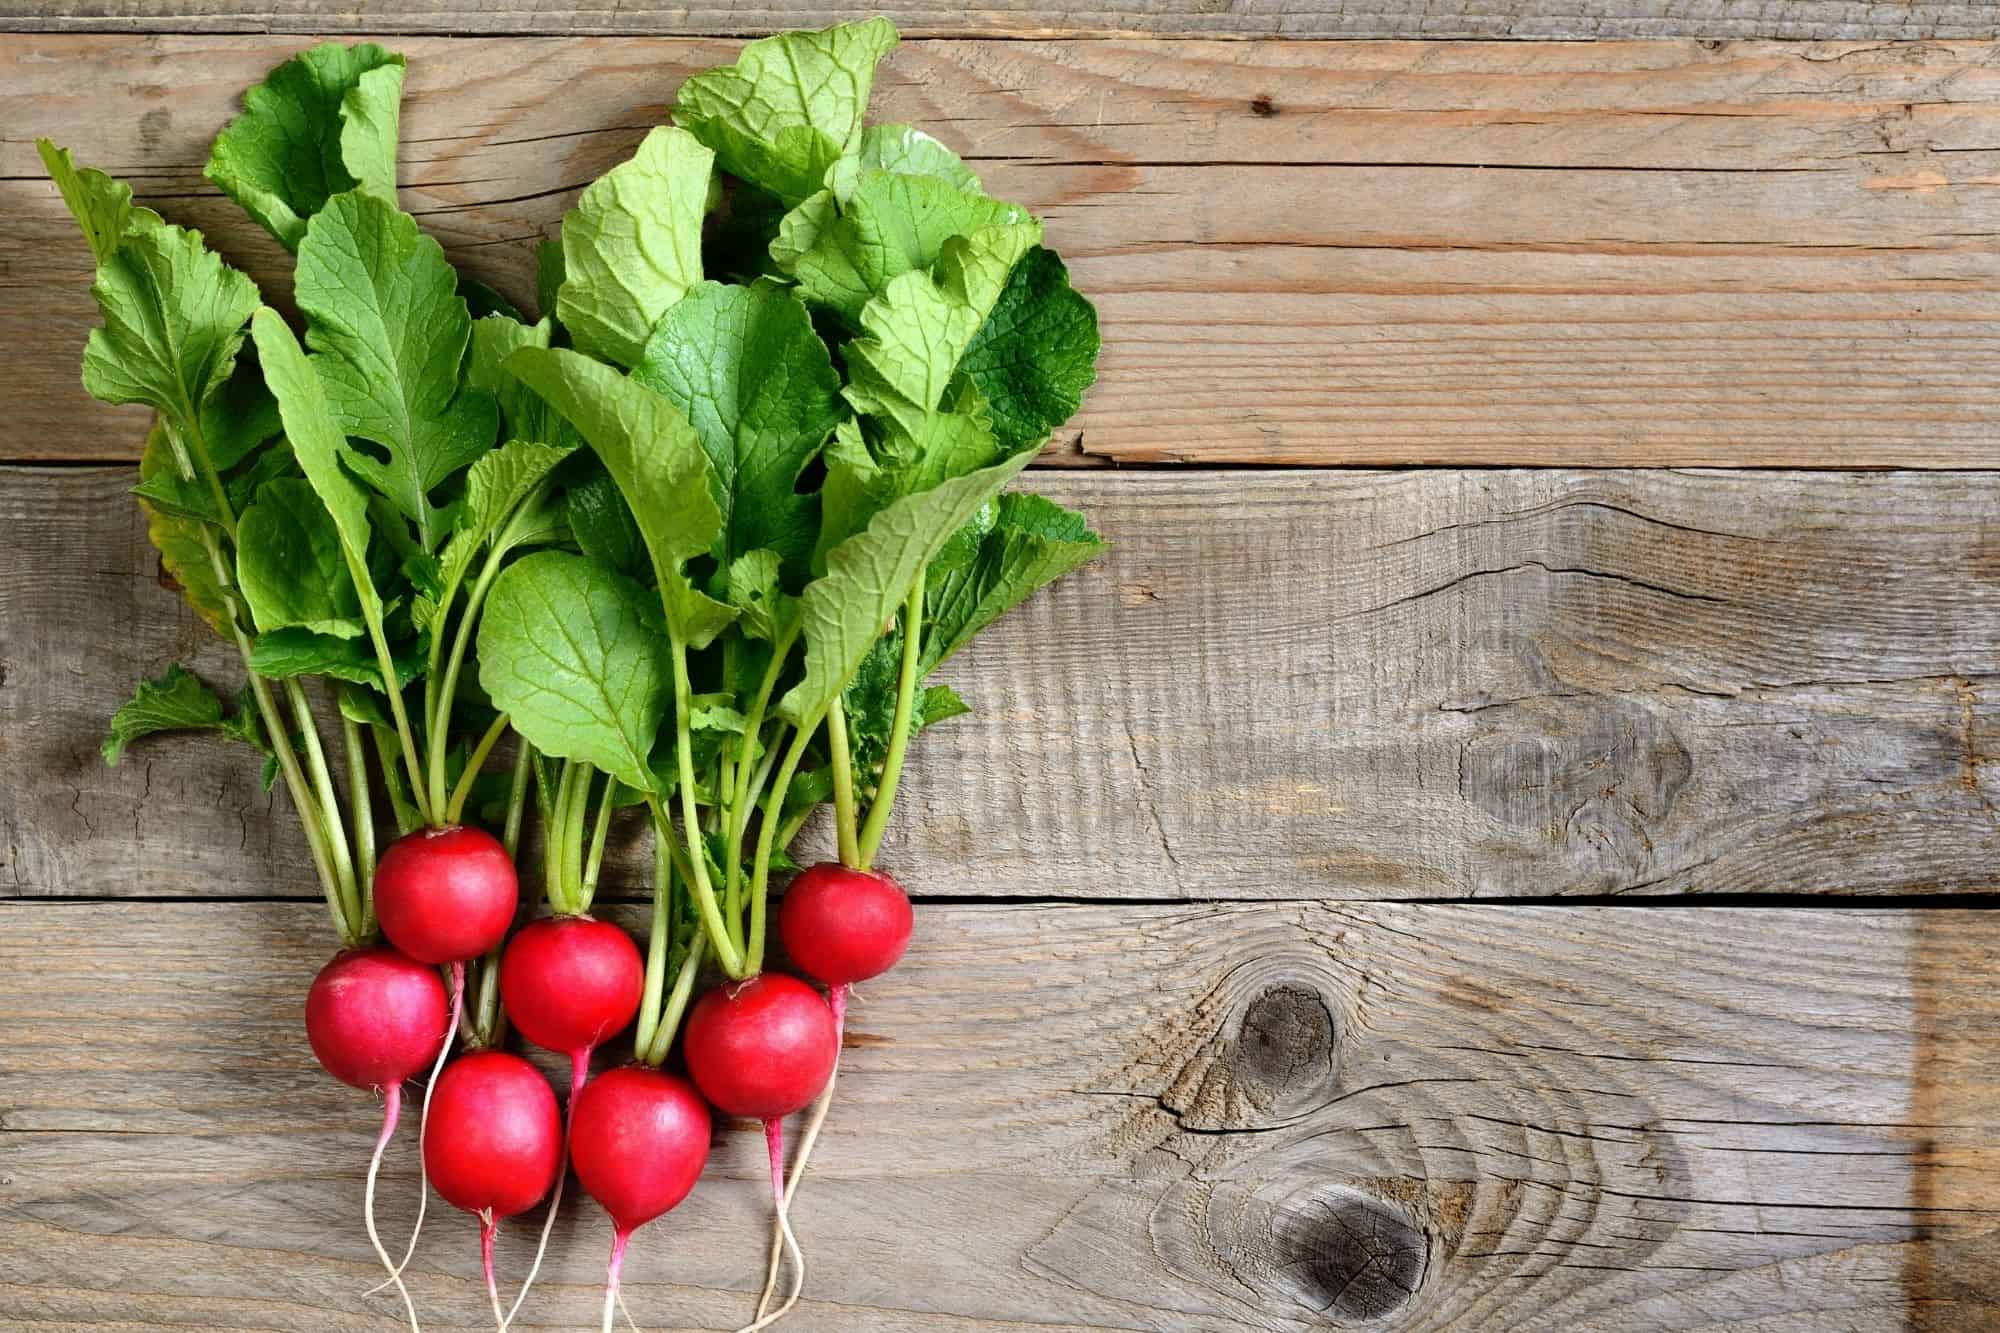 Radishes with the green tops attached on a wooden backdrop.